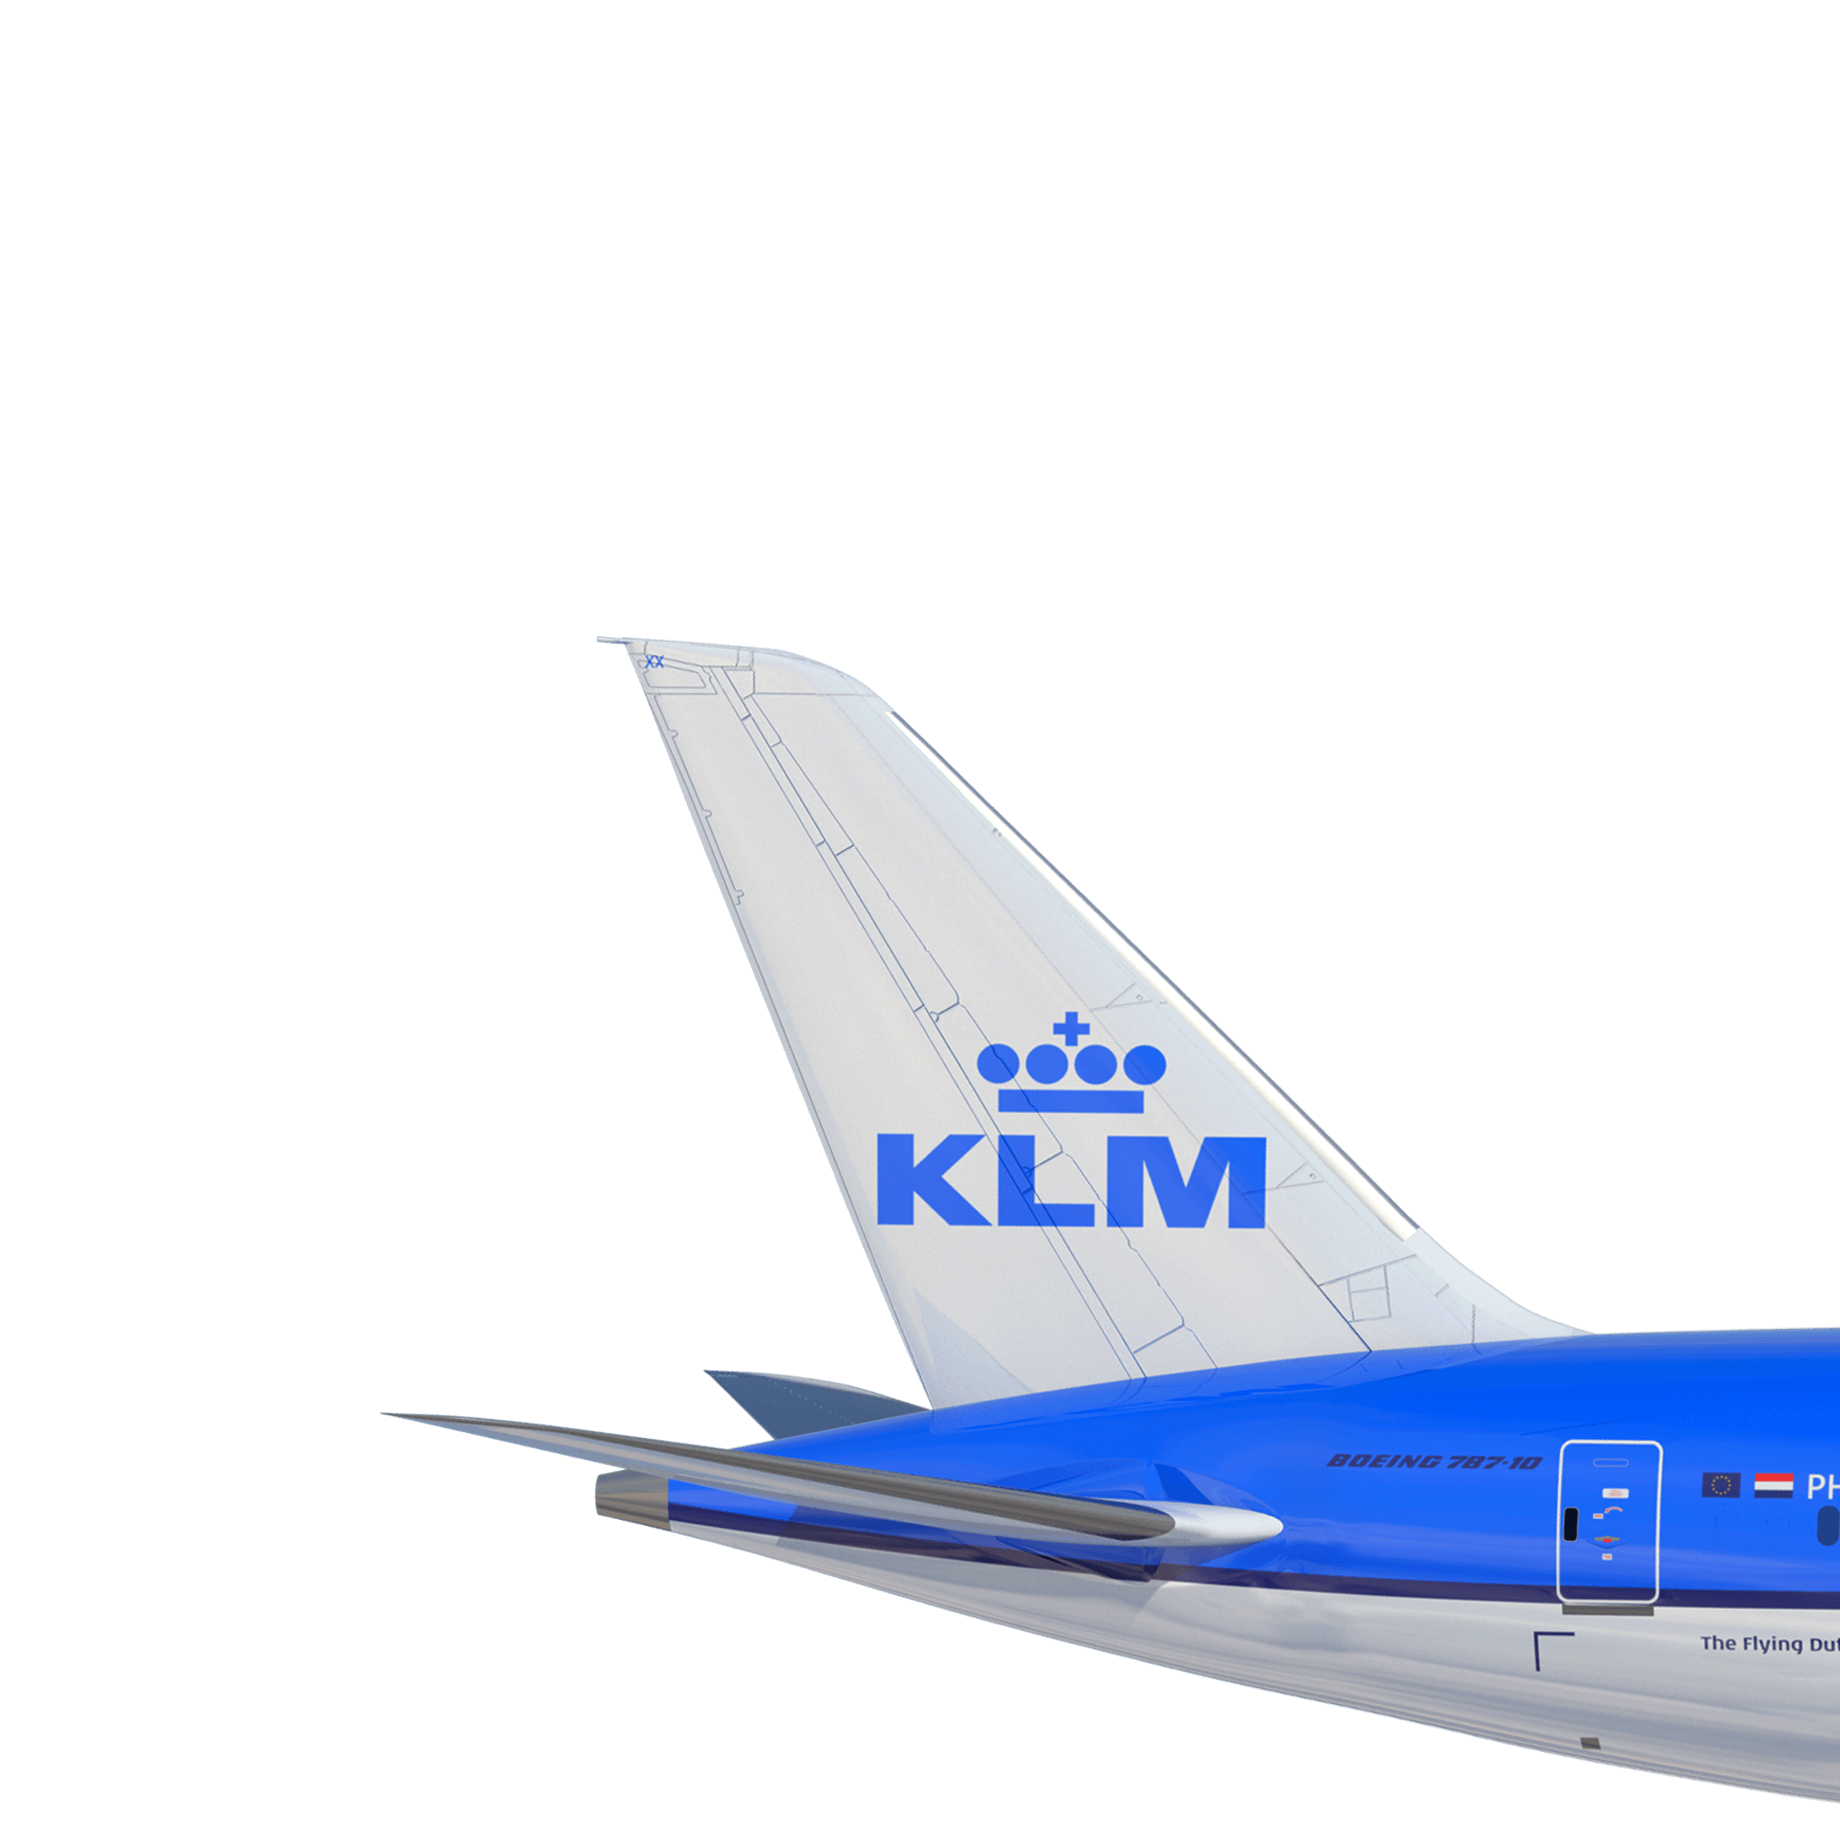 Case KLM | Increase the impact of email | NEWCRAFT